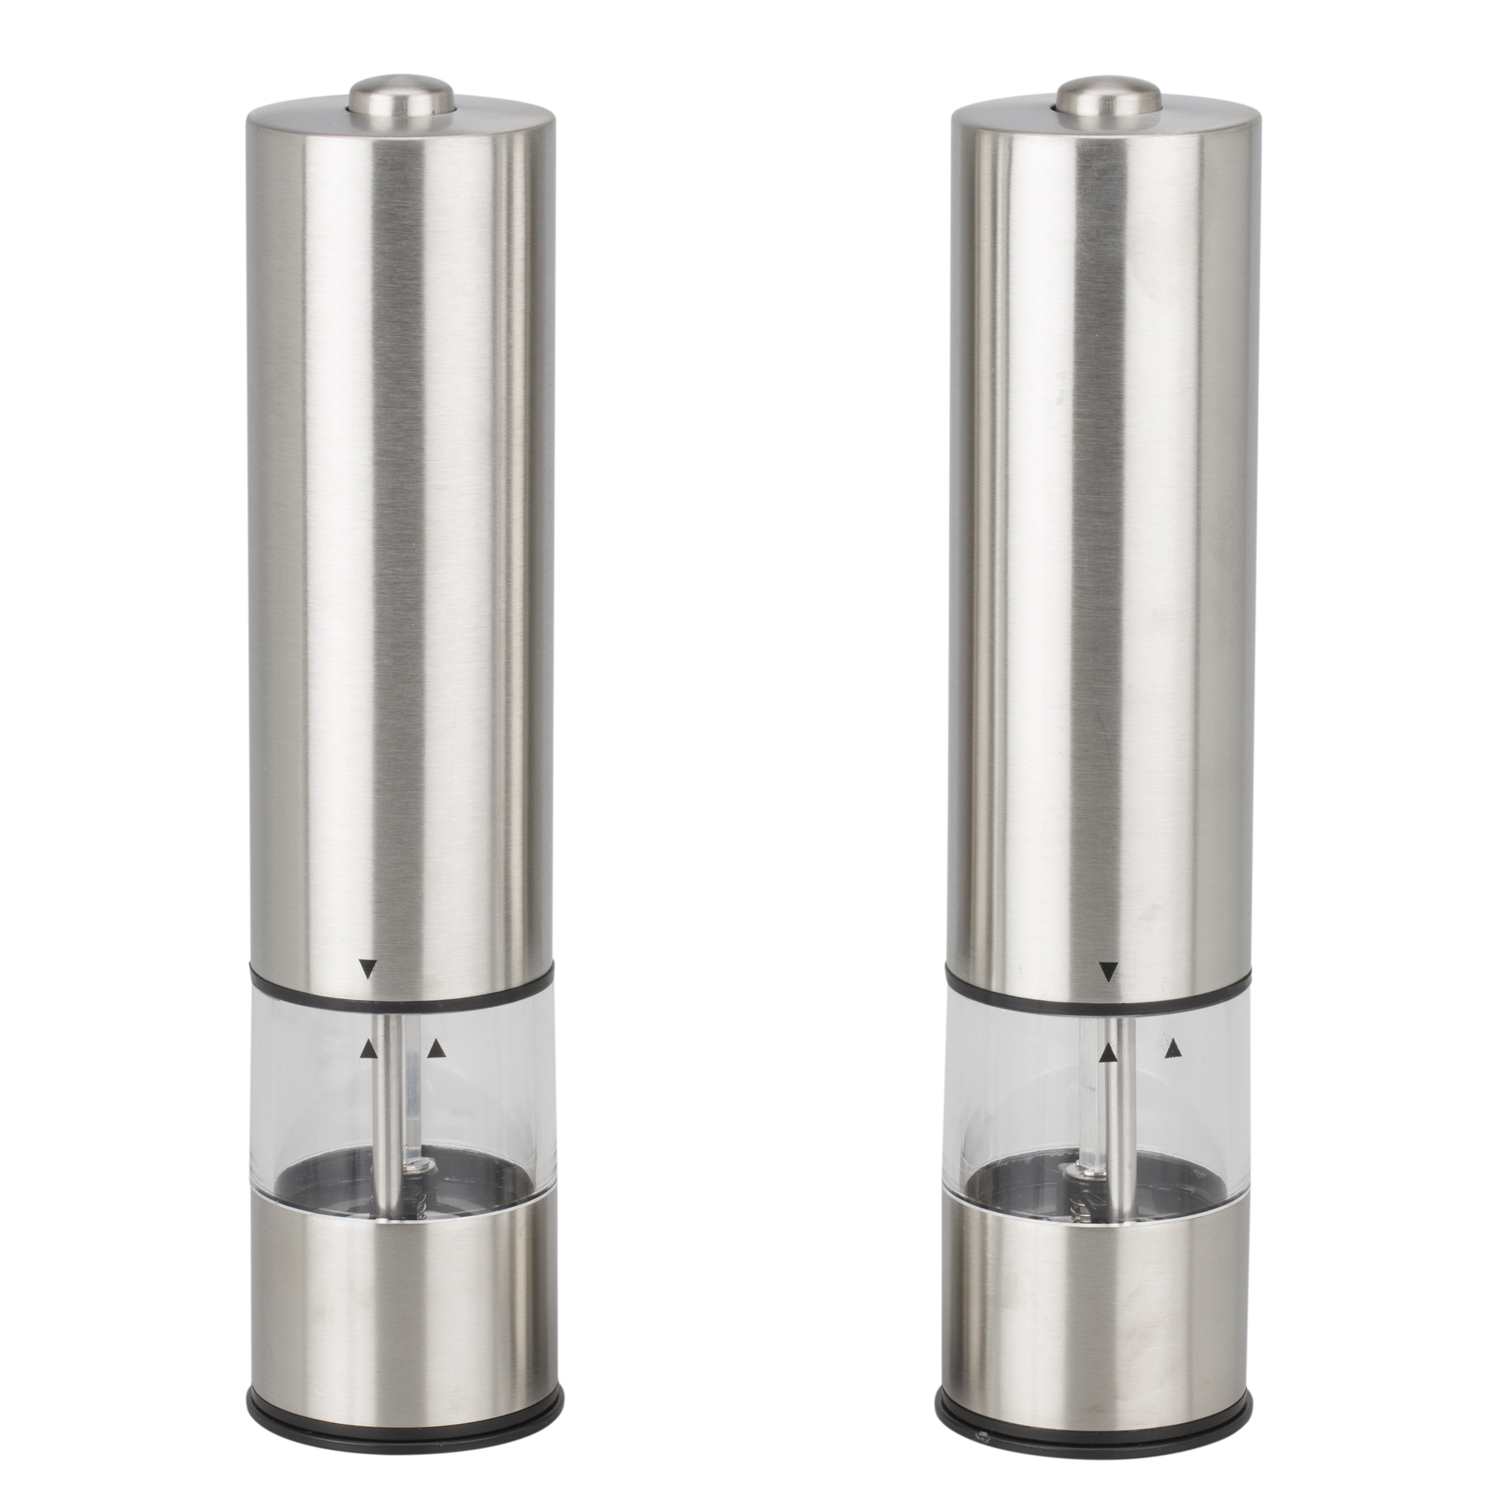 Mayfair Electric Stainless Steel Salt and Pepper Mill Set Image 1